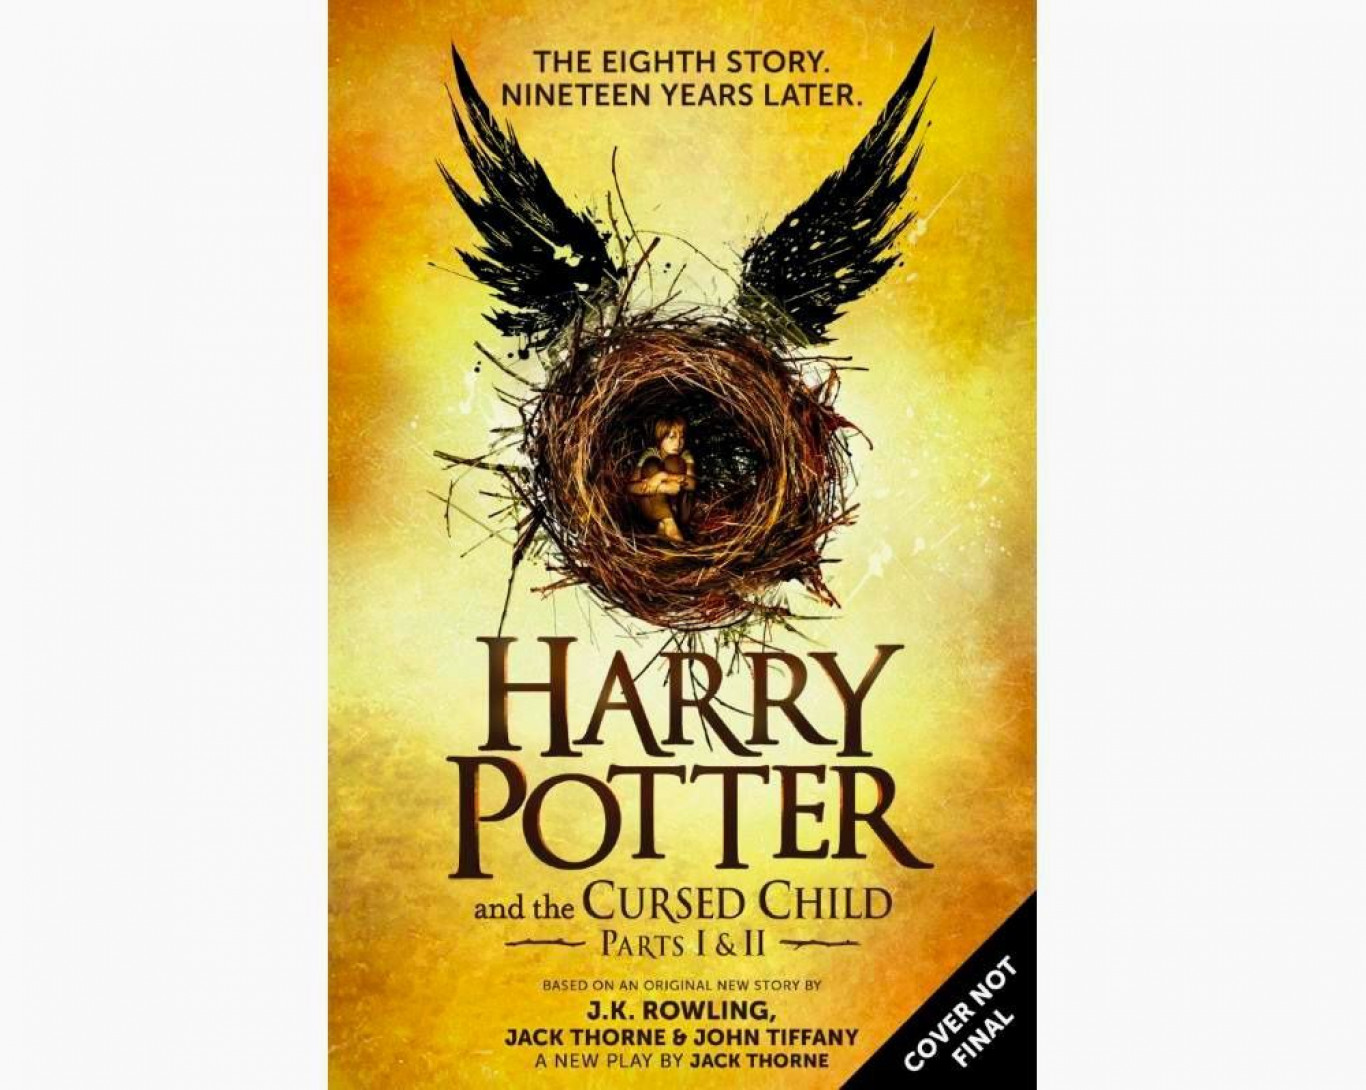 jk rowling harry potter and the cursed child